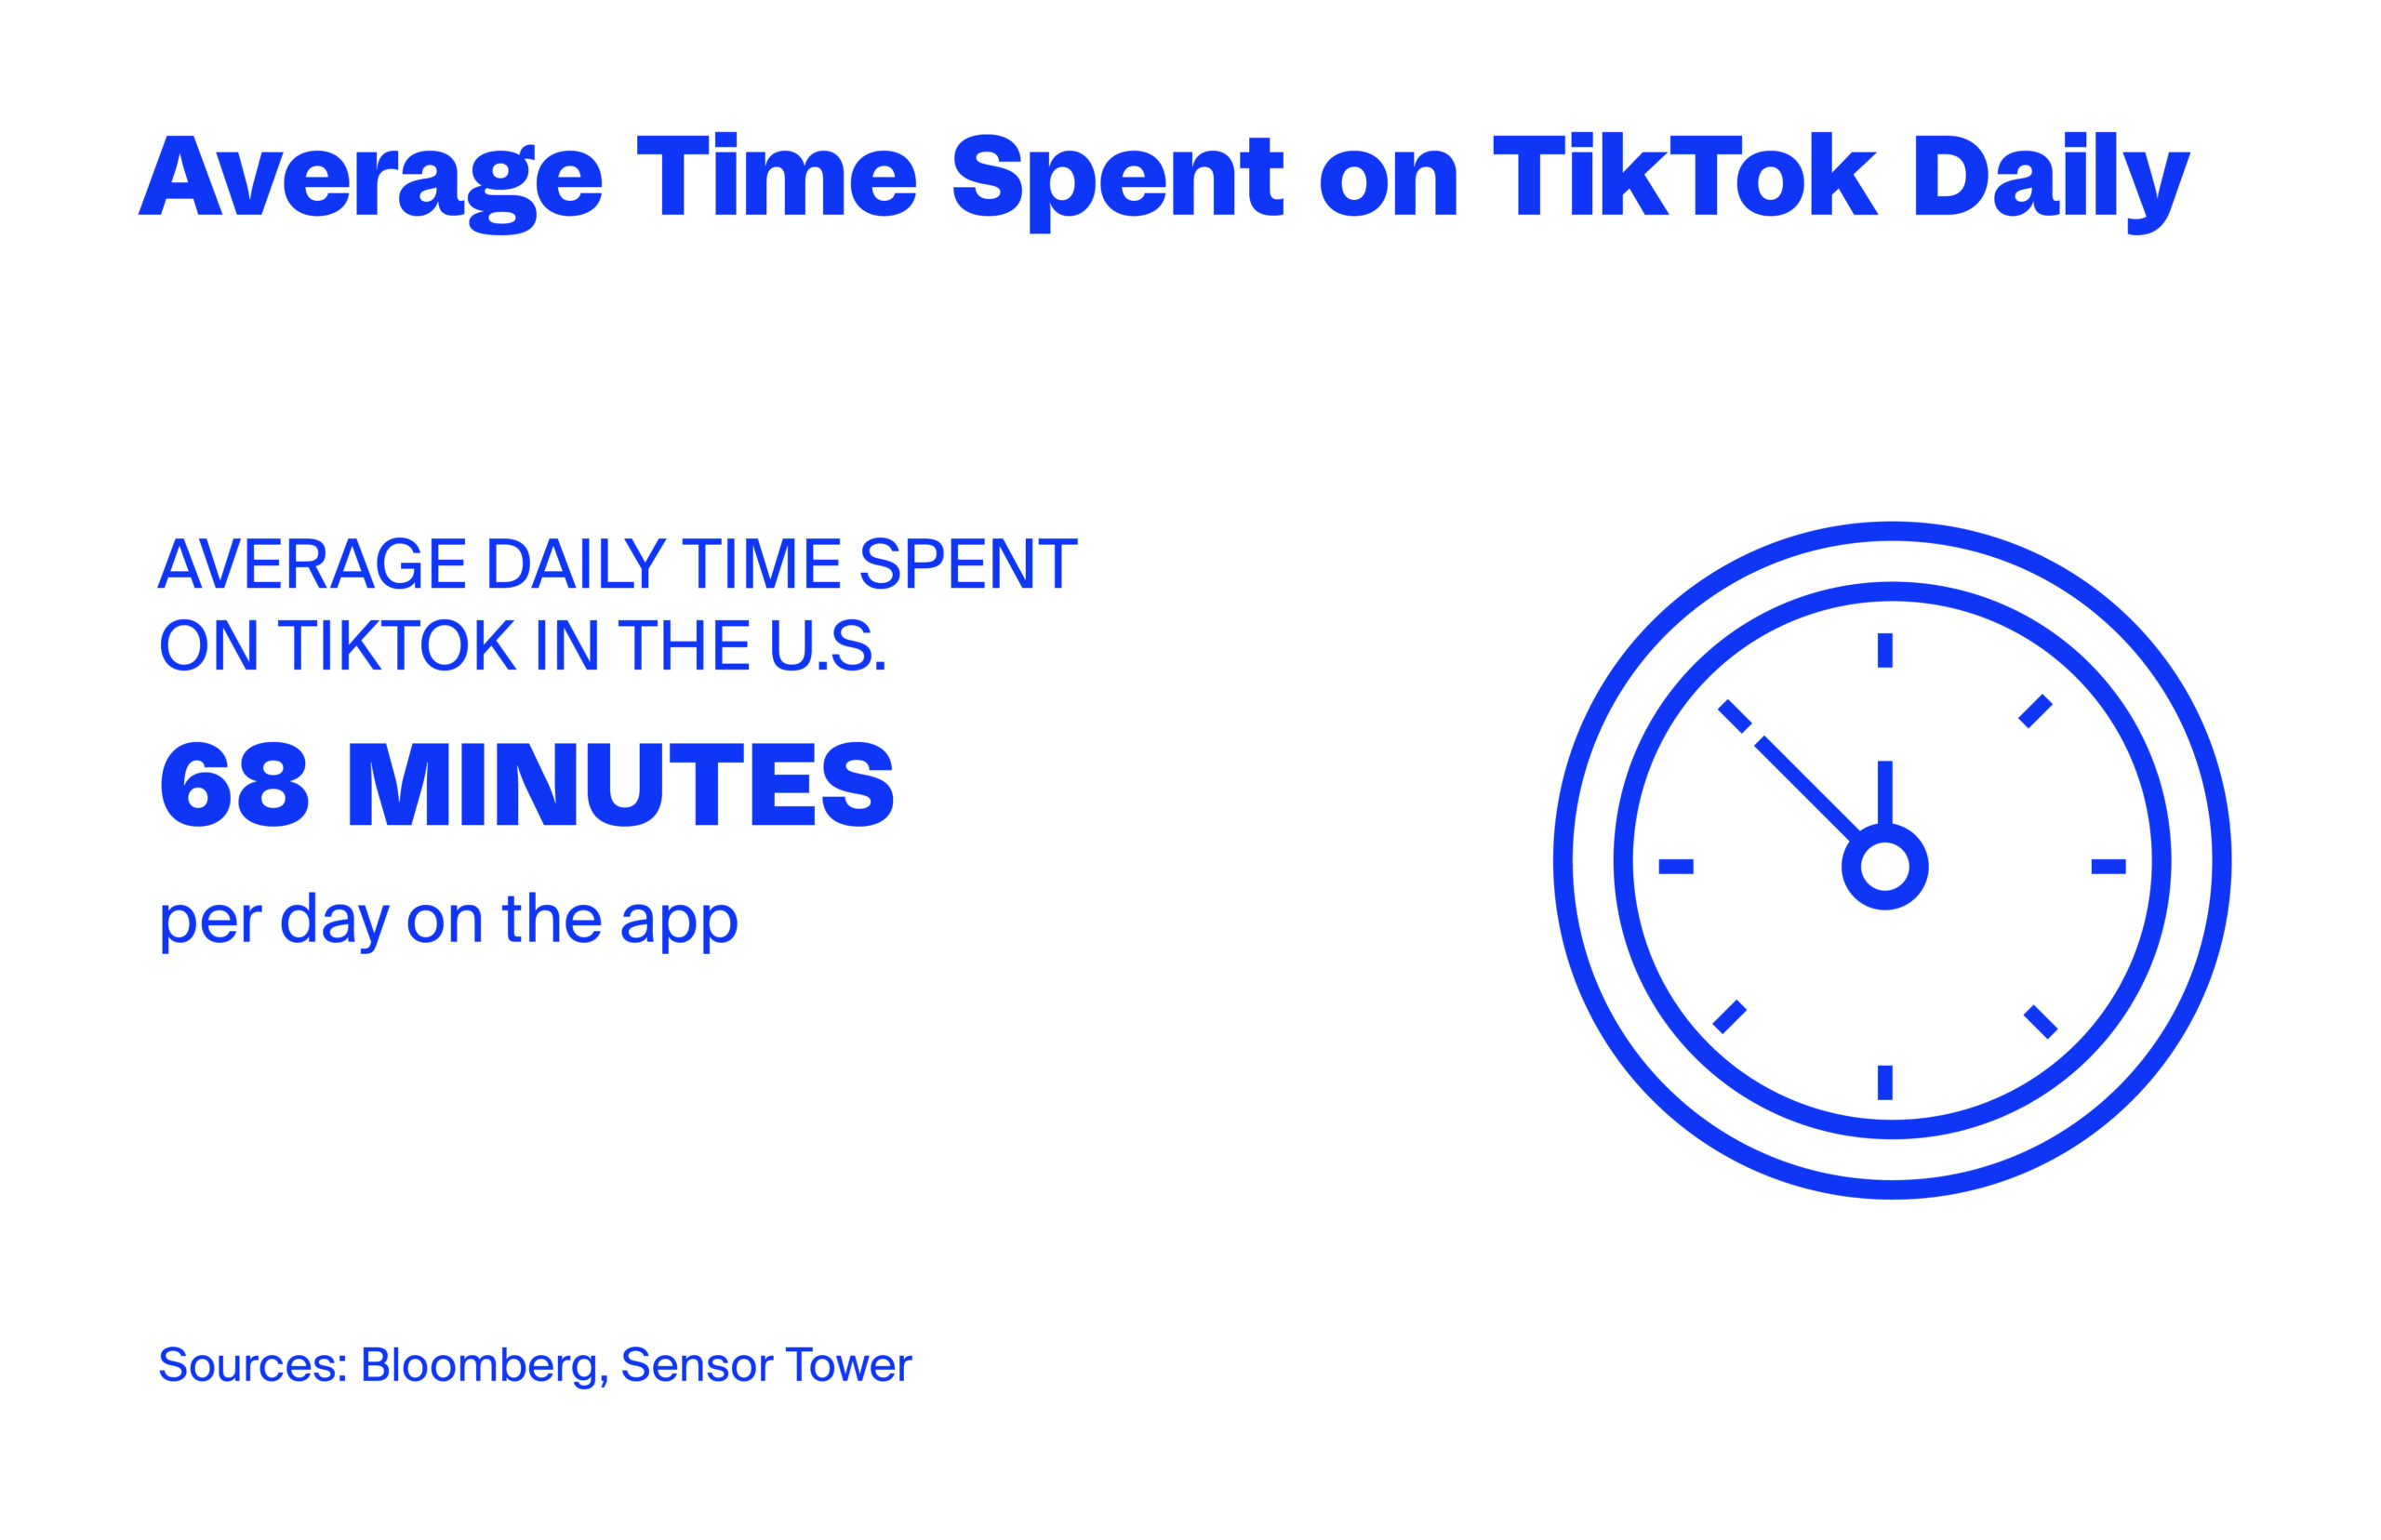 TikTok users in the United States spend an average of 68 minutes on the app per day.